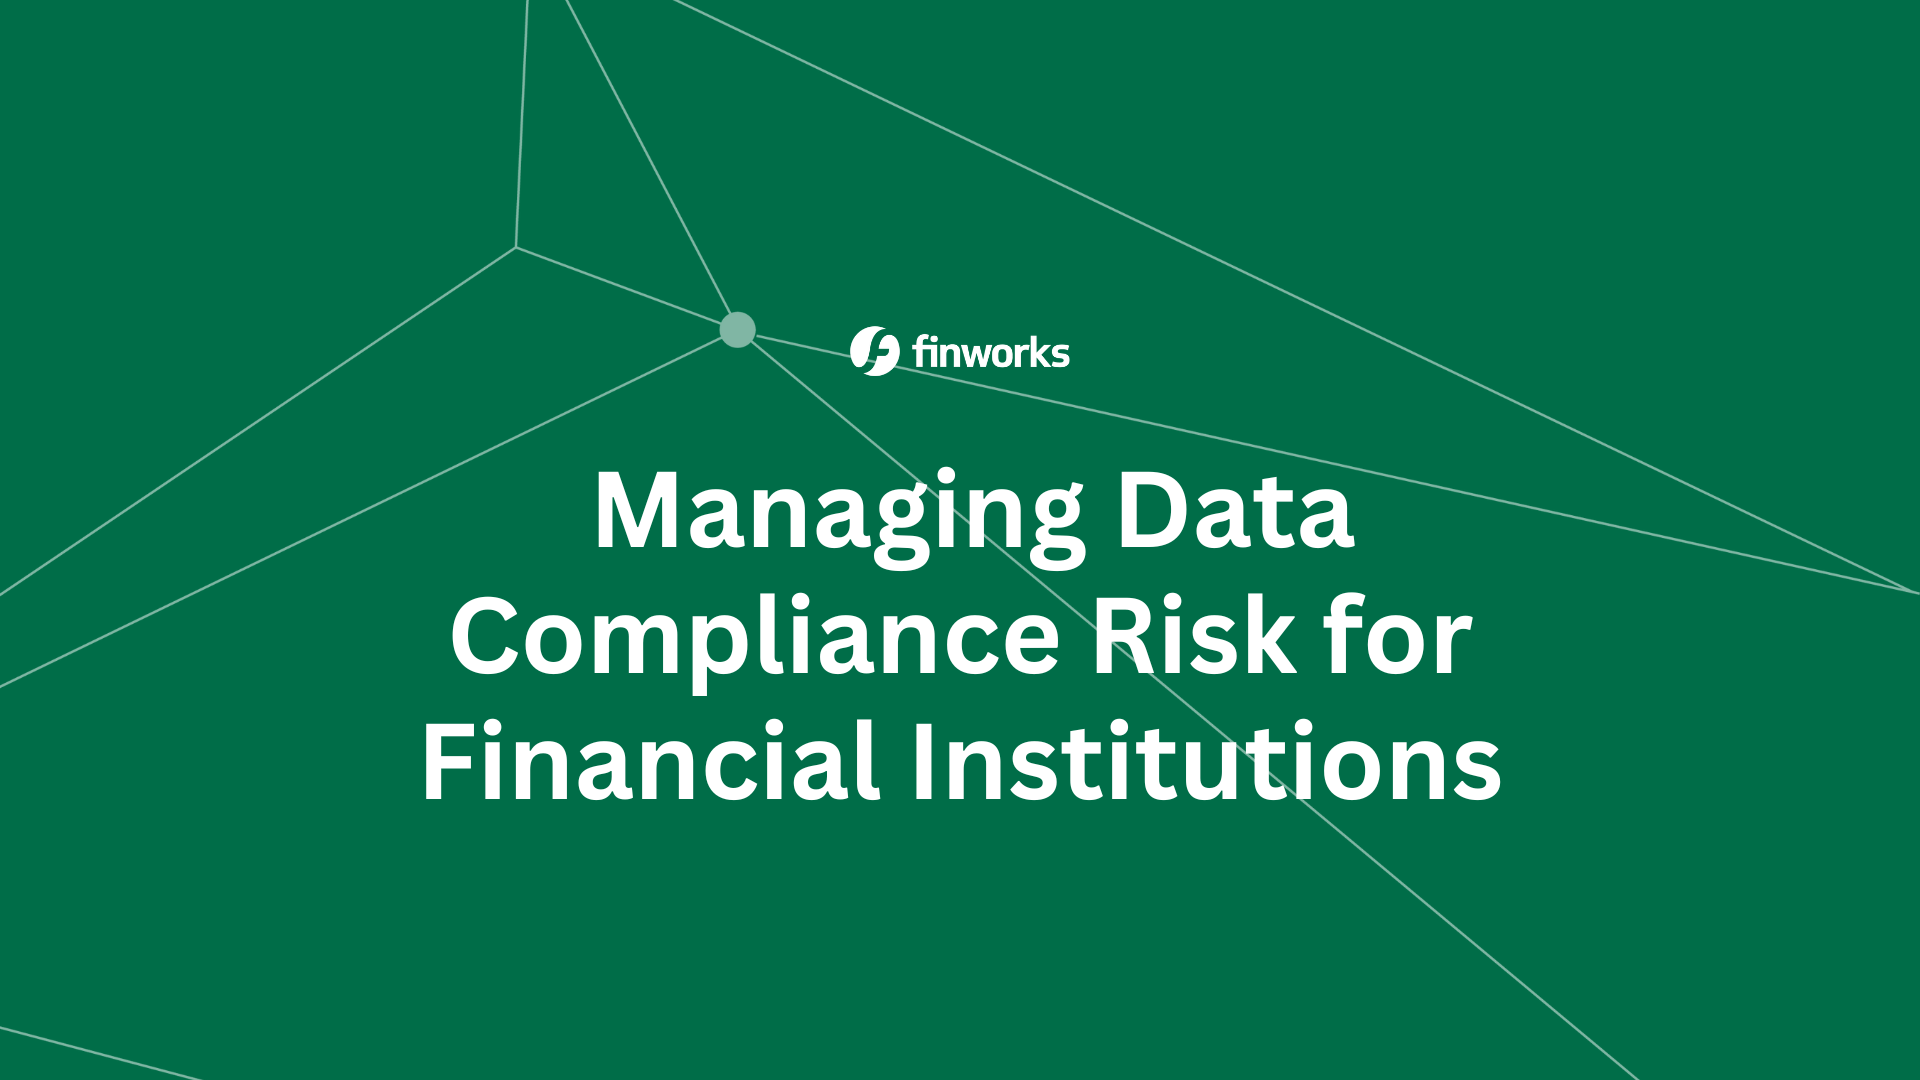 Managing Data Compliance Risk for Financial Institutions